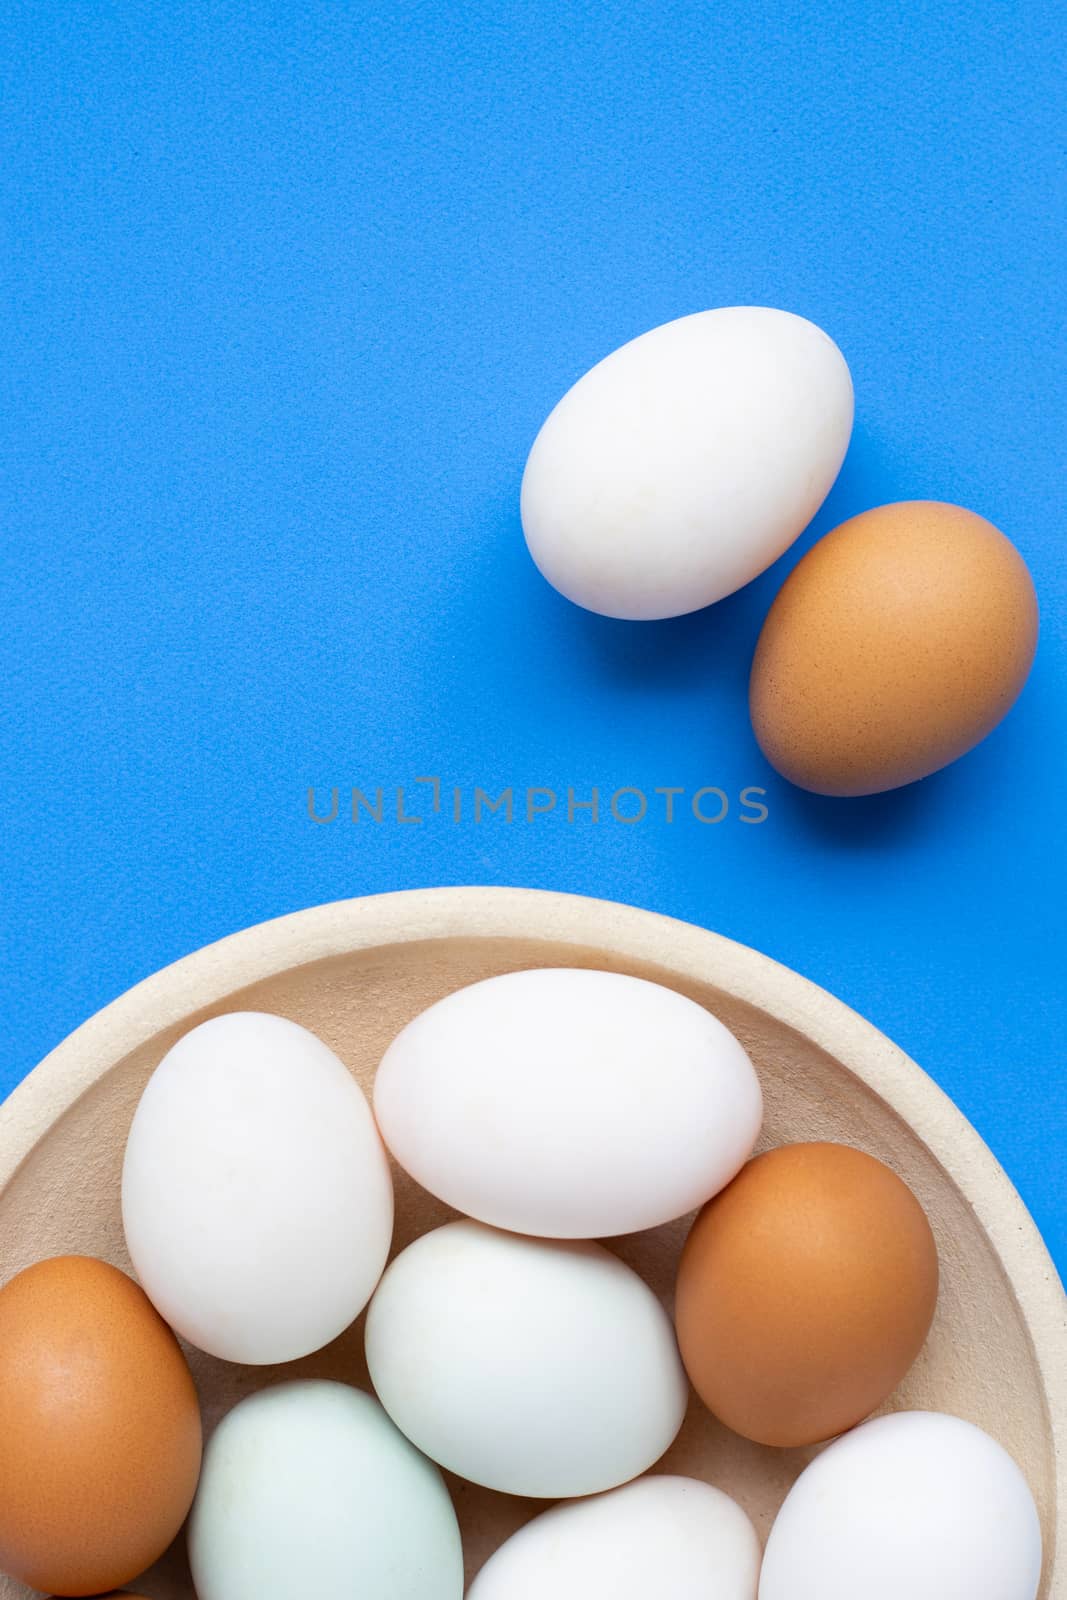 Eggs on blue background.  by Bowonpat